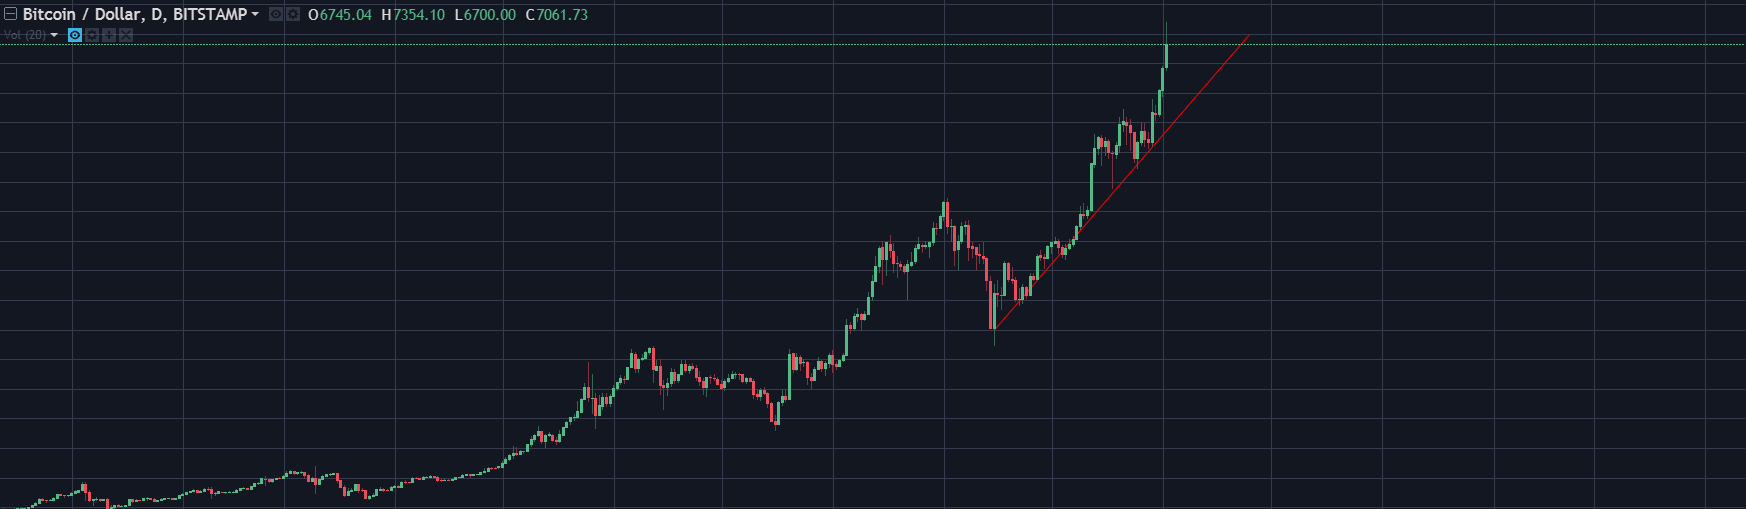 Bitcoin Reaches Another All Time High, Receives More Buyer Support After CME Announcement